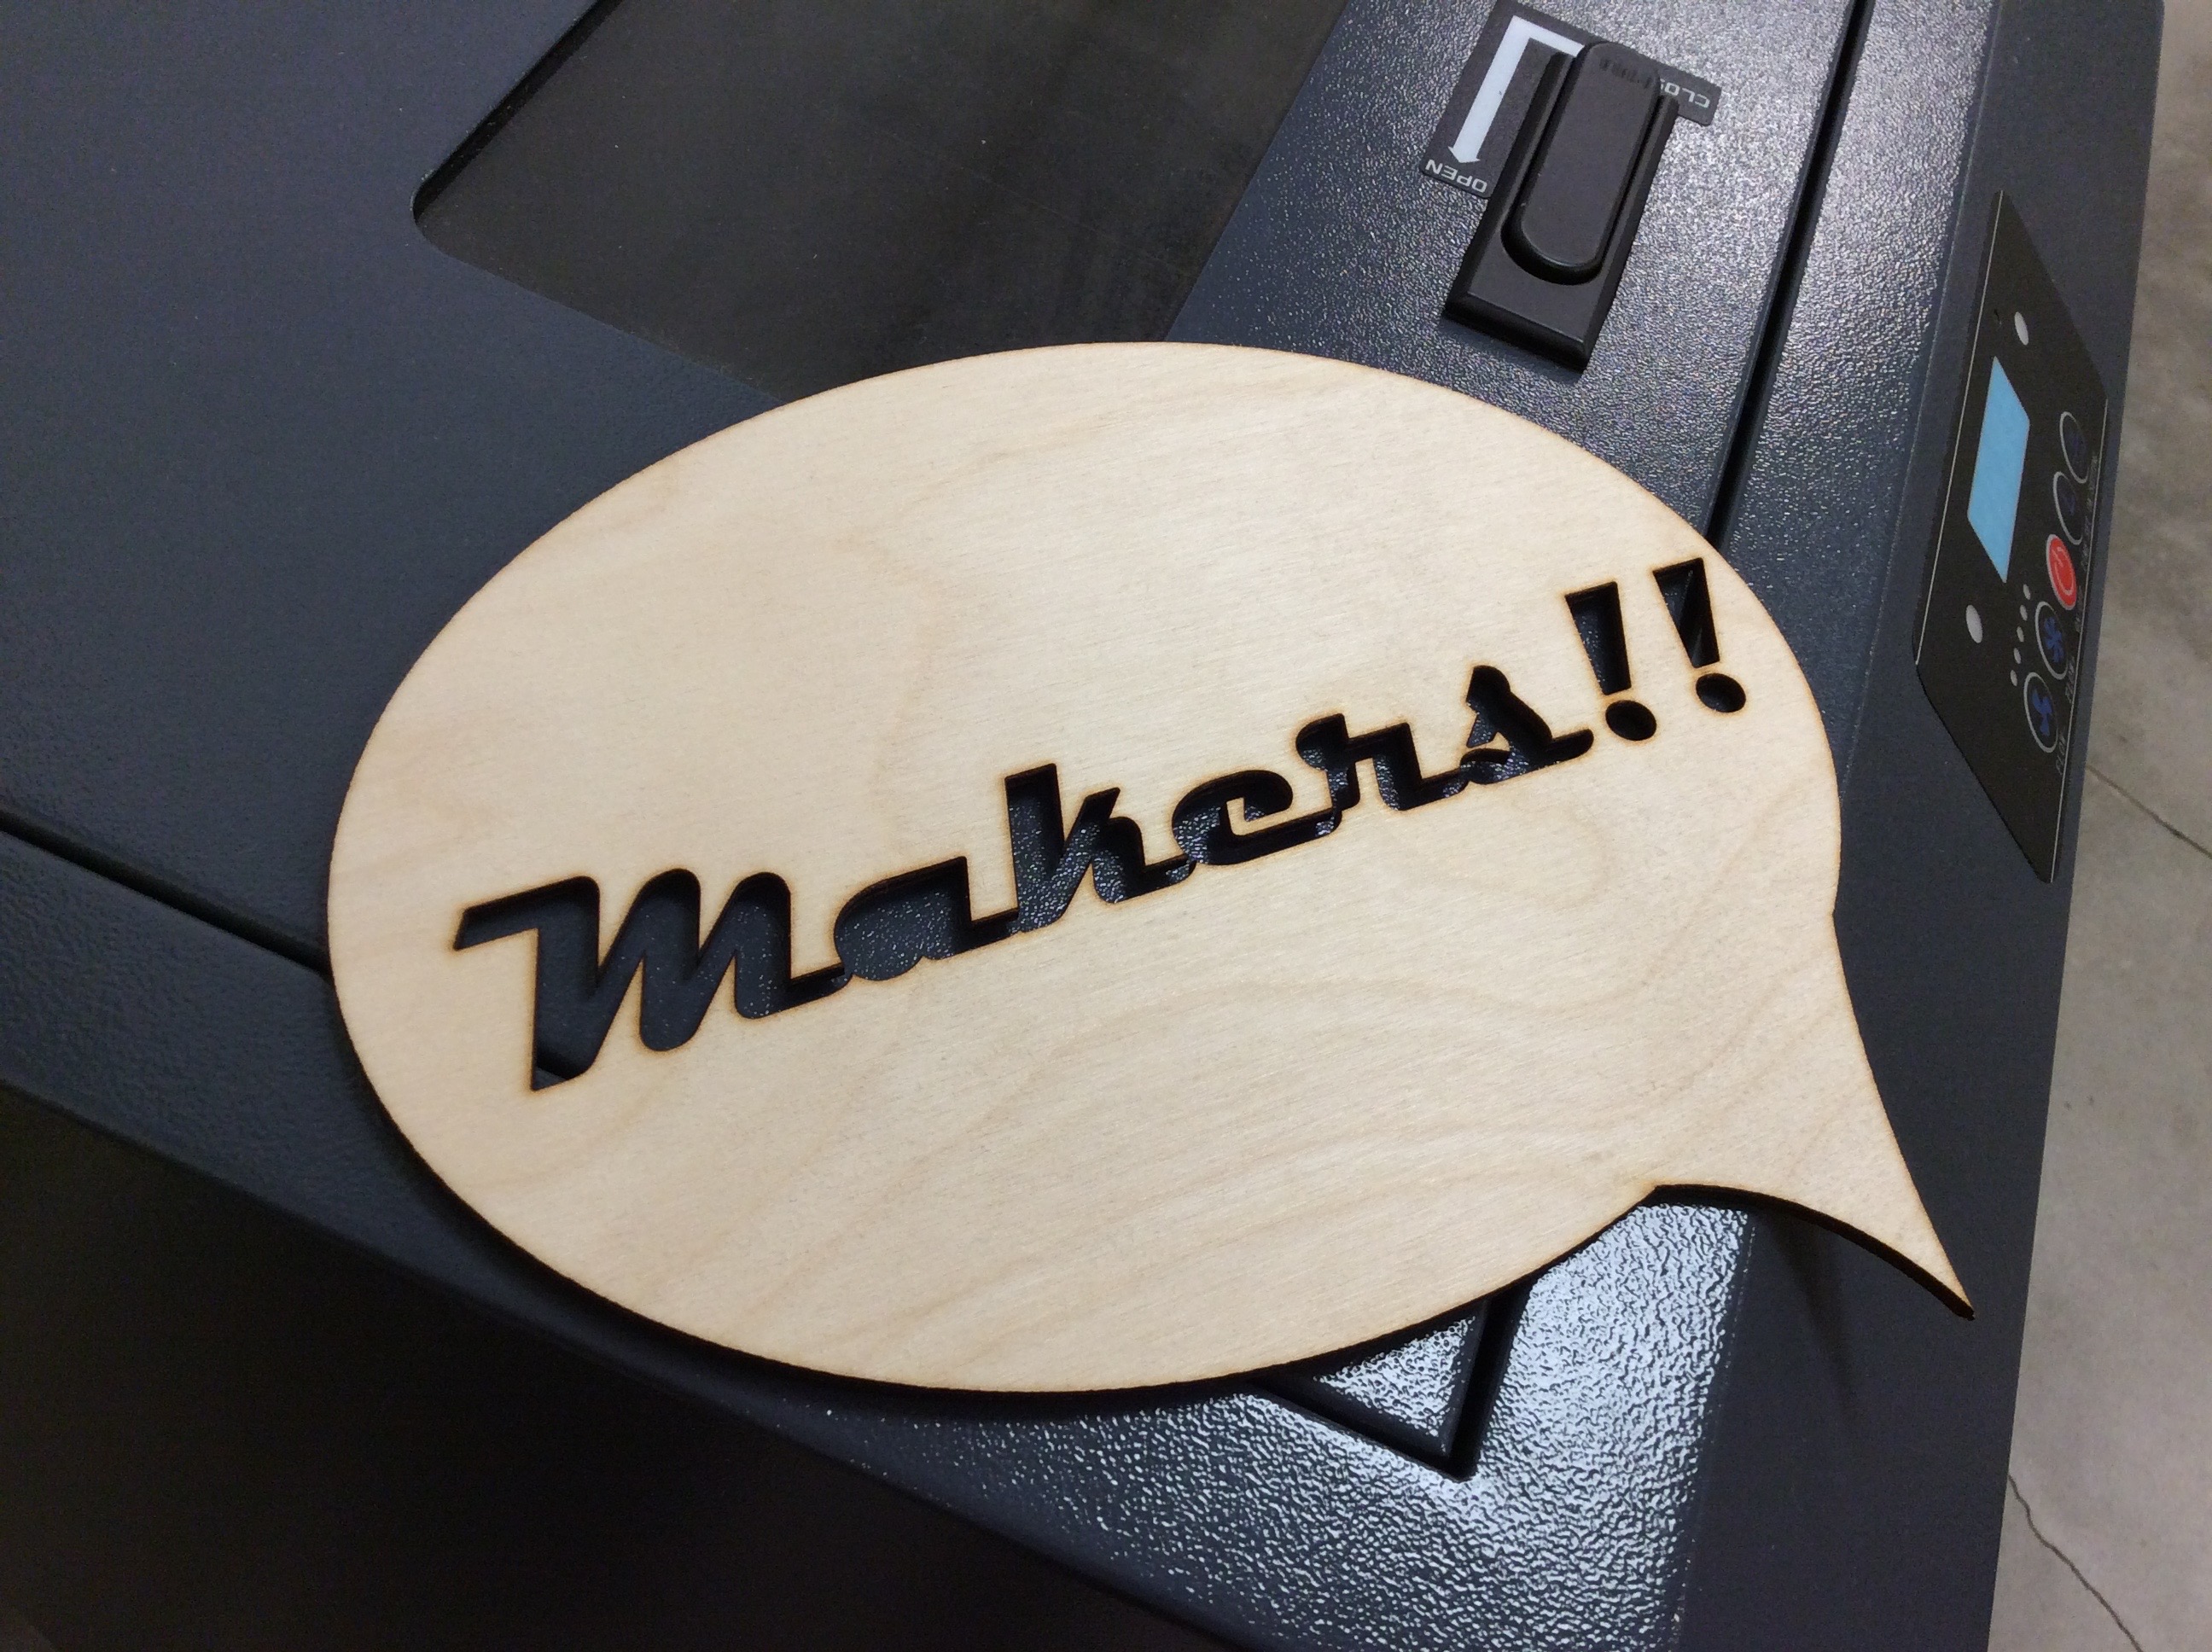 A piece of wood that says "Makers!!"